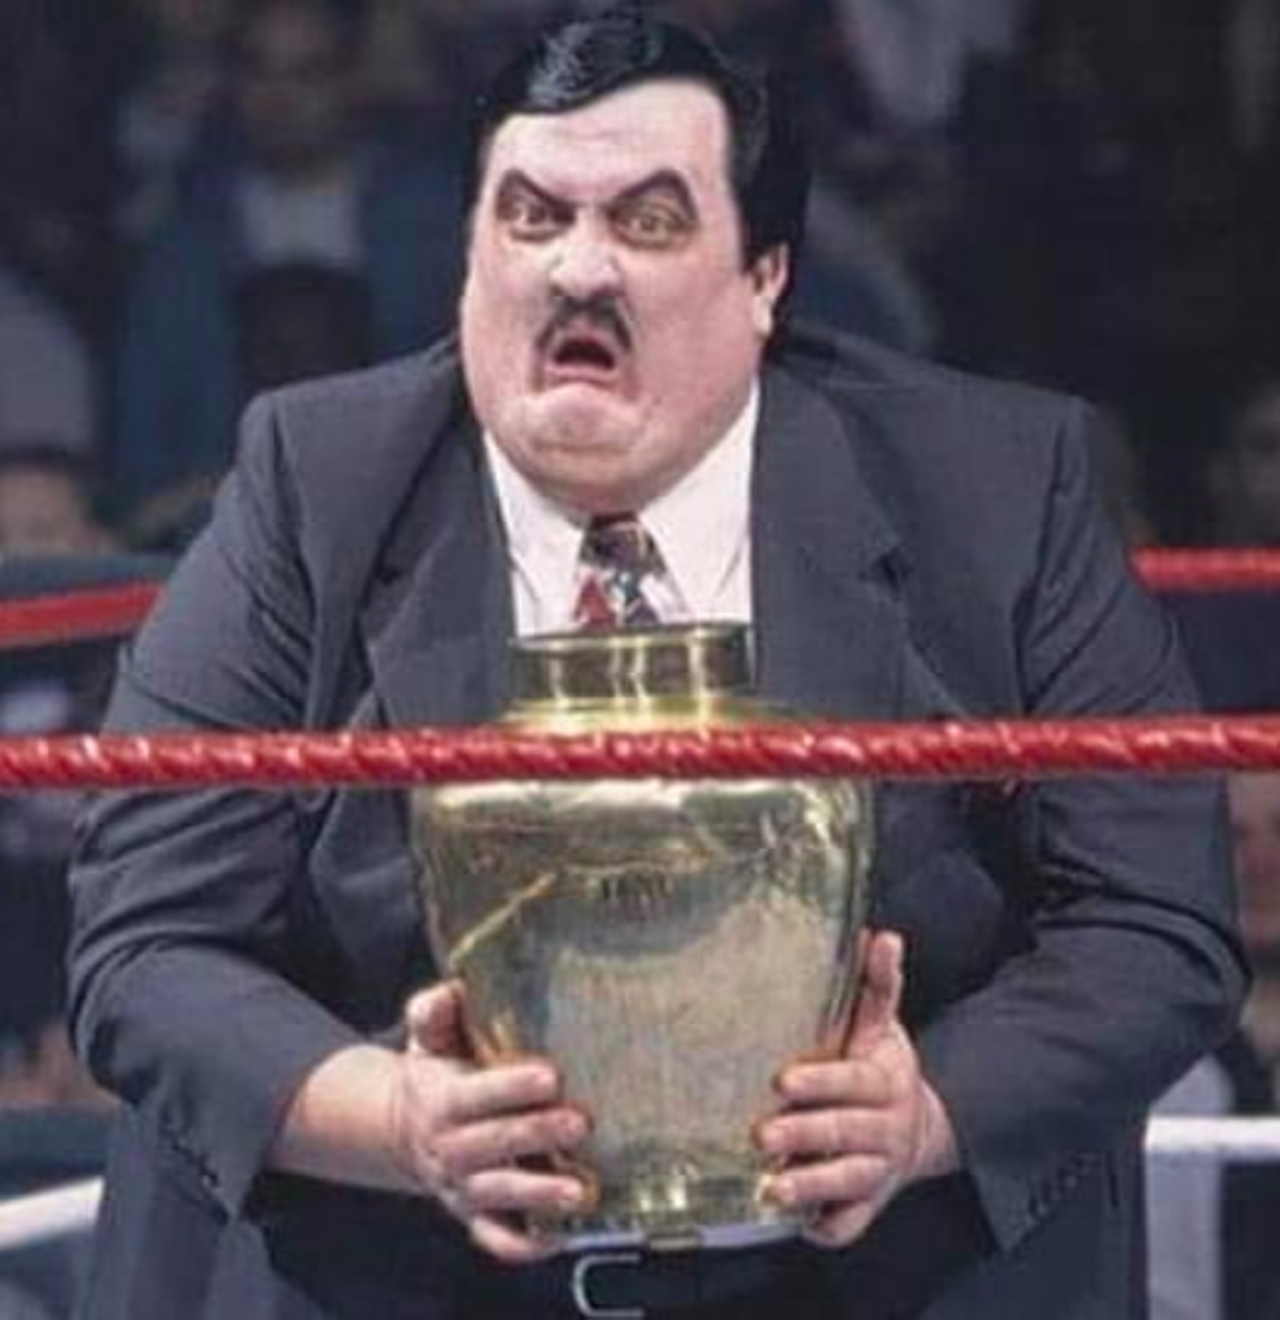 William A. Moody (aka Paul Bearer)
Wrestling fans will be delighted to know that the late Paul Bearer spent some time in San Antonio. Moody served in the U.S. Air Force for four years and attended San Antonio College before studying at a university in his home state of Alabama. Though he had a list of personalities, Moody was perhaps best well-known as Paul Bearer during his WWE career.
Photo via Instagram / wrestlingthenandnow